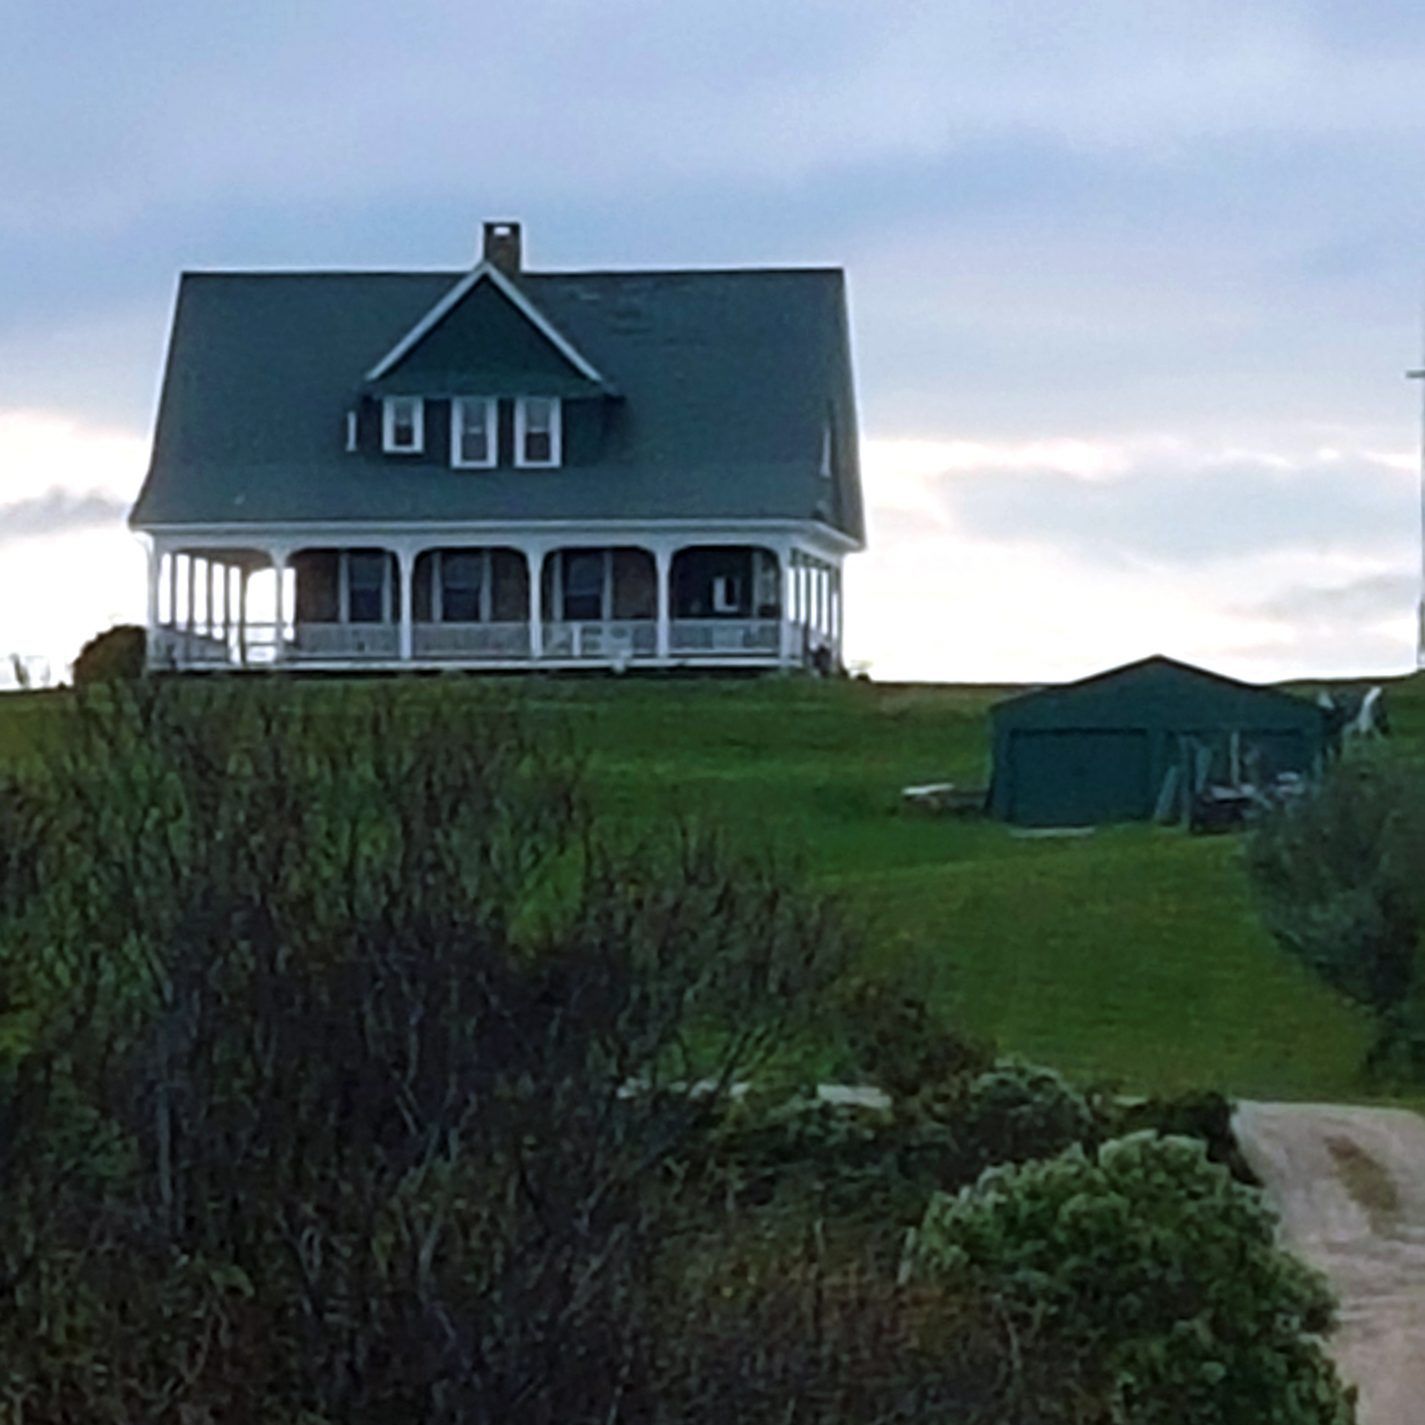 The distinctive architecture of this windswept island, with its emphasis on porches, can be seen in the most modern buildings. Photo courtesy of Dan Drollette Jr.